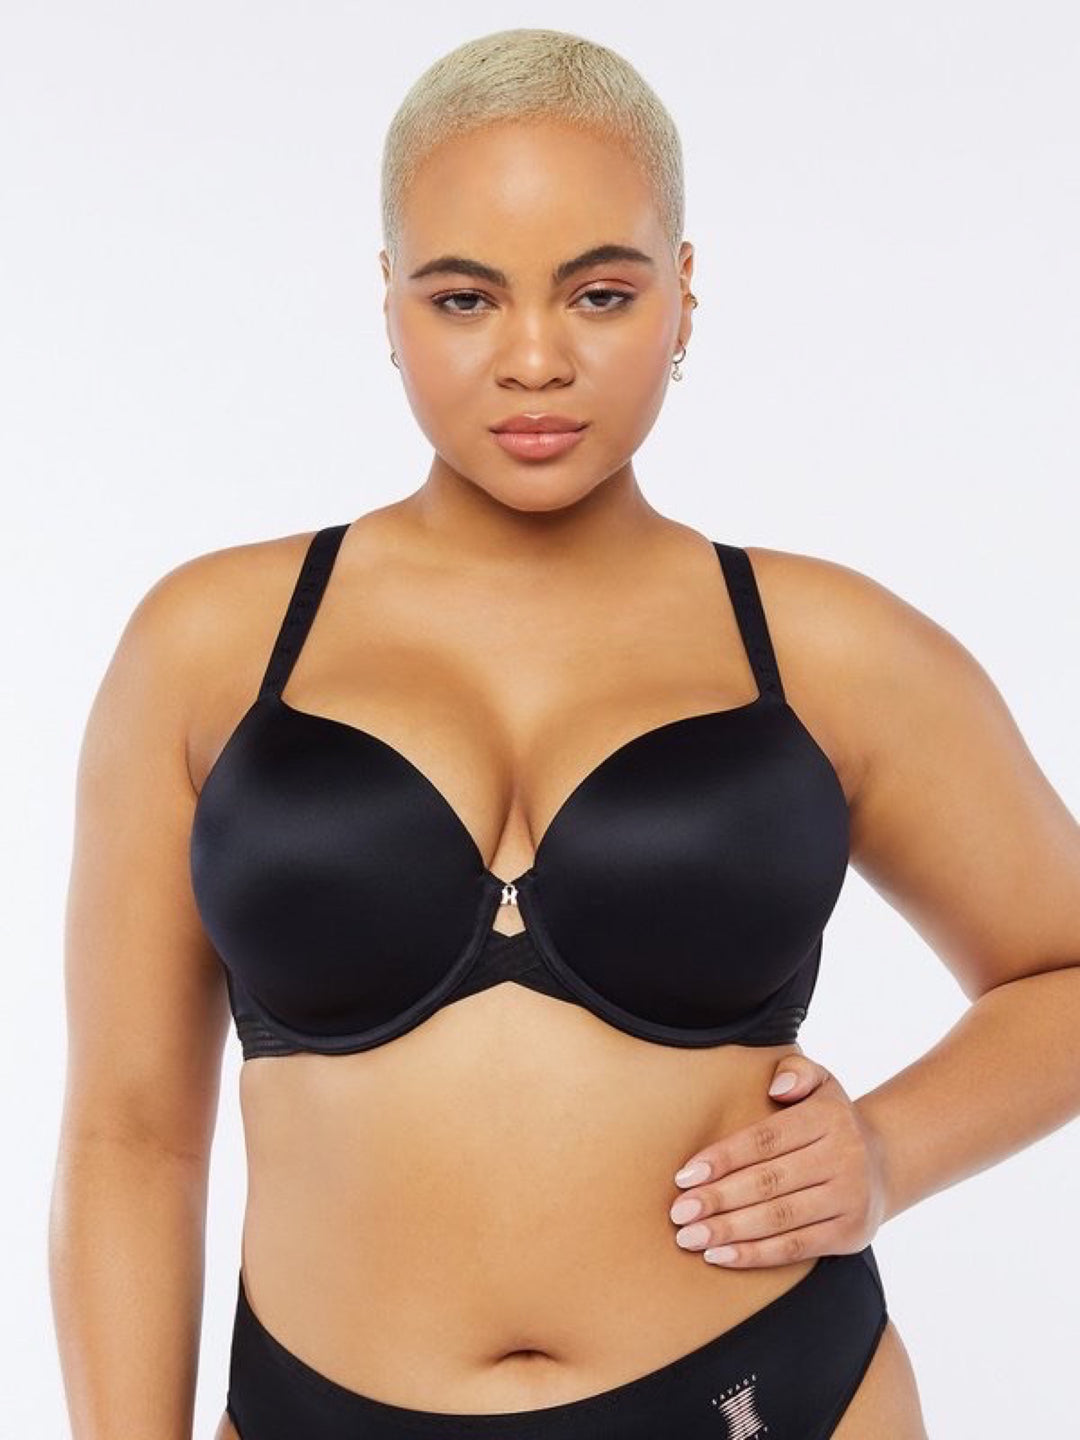 Our plus size bras fit just right and make us feel amazing🤗 thanks to  BraWorld!! #plussizebra #Ugandaplussizebra #kenyaplussizebra